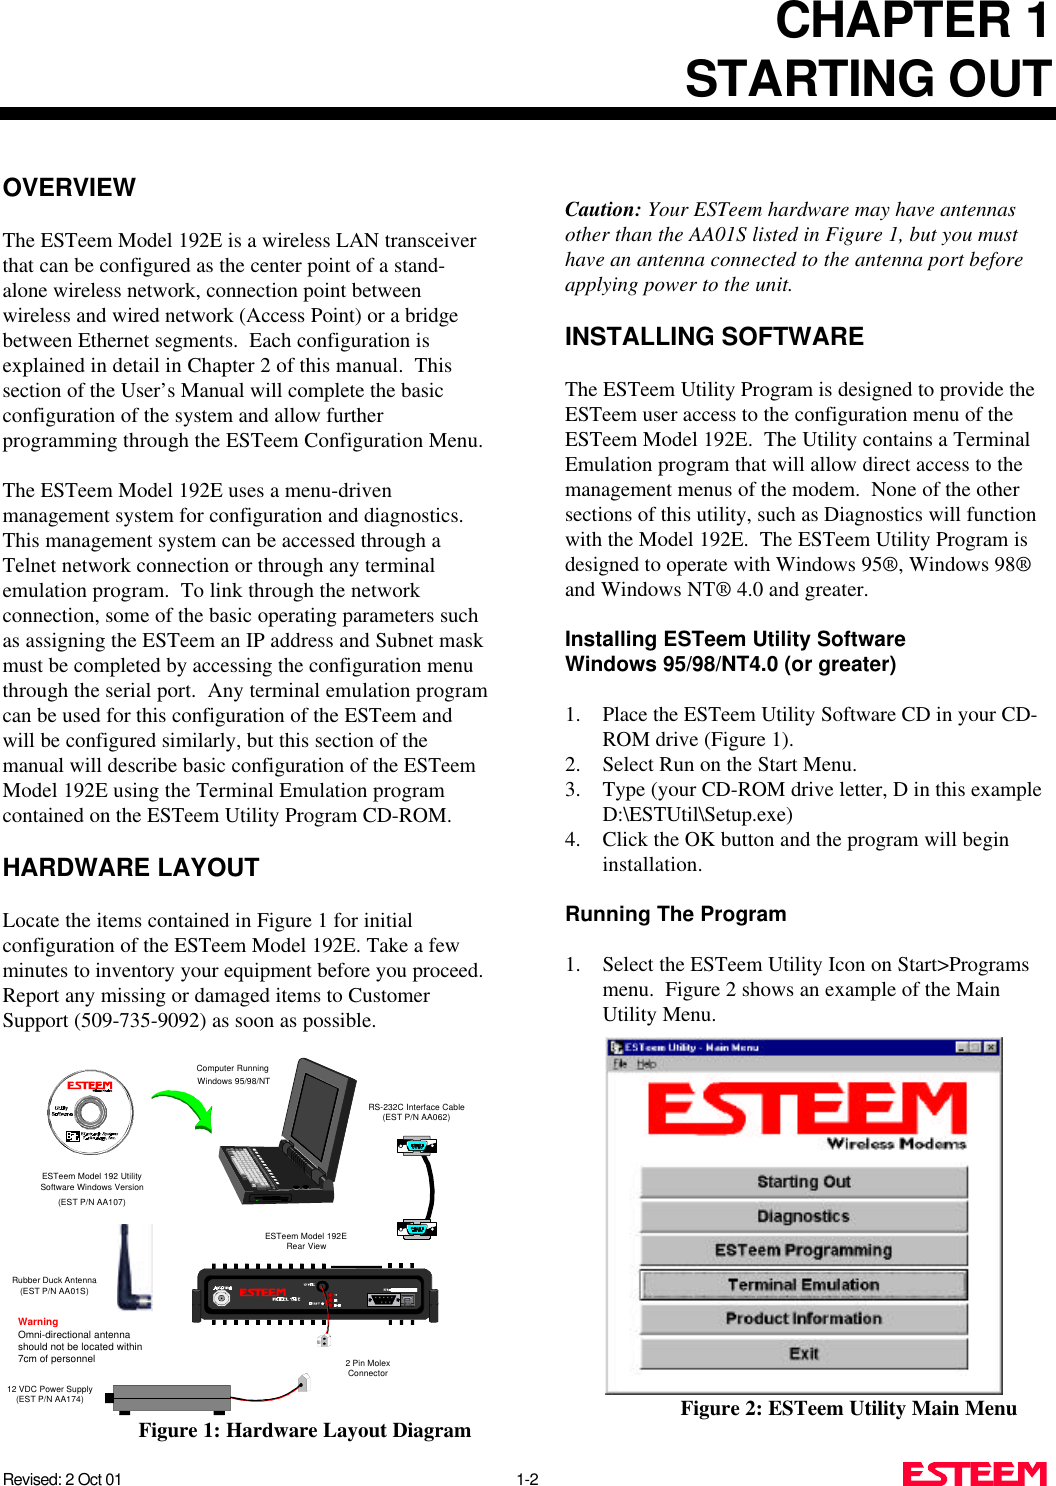 CHAPTER 1STARTING OUTRevised: 2 Oct 01 1-2OVERVIEWThe ESTeem Model 192E is a wireless LAN transceiverthat can be configured as the center point of a stand-alone wireless network, connection point betweenwireless and wired network (Access Point) or a bridgebetween Ethernet segments.  Each configuration isexplained in detail in Chapter 2 of this manual.  Thissection of the User’s Manual will complete the basicconfiguration of the system and allow furtherprogramming through the ESTeem Configuration Menu.The ESTeem Model 192E uses a menu-drivenmanagement system for configuration and diagnostics. This management system can be accessed through aTelnet network connection or through any terminalemulation program.  To link through the networkconnection, some of the basic operating parameters suchas assigning the ESTeem an IP address and Subnet maskmust be completed by accessing the configuration menuthrough the serial port.  Any terminal emulation programcan be used for this configuration of the ESTeem andwill be configured similarly, but this section of themanual will describe basic configuration of the ESTeemModel 192E using the Terminal Emulation programcontained on the ESTeem Utility Program CD-ROM.HARDWARE LAYOUTLocate the items contained in Figure 1 for initialconfiguration of the ESTeem Model 192E. Take a fewminutes to inventory your equipment before you proceed.Report any missing or damaged items to CustomerSupport (509-735-9092) as soon as possible.Caution: Your ESTeem hardware may have antennasother than the AA01S listed in Figure 1, but you musthave an antenna connected to the antenna port beforeapplying power to the unit.INSTALLING SOFTWAREThe ESTeem Utility Program is designed to provide theESTeem user access to the configuration menu of theESTeem Model 192E.  The Utility contains a TerminalEmulation program that will allow direct access to themanagement menus of the modem.  None of the othersections of this utility, such as Diagnostics will functionwith the Model 192E.  The ESTeem Utility Program isdesigned to operate with Windows 95®, Windows 98®and Windows NT® 4.0 and greater.Installing ESTeem Utility SoftwareWindows 95/98/NT4.0 (or greater)1. Place the ESTeem Utility Software CD in your CD-ROM drive (Figure 1).2. Select Run on the Start Menu.3. Type (your CD-ROM drive letter, D in this exampleD:\ESTUtil\Setup.exe)4. Click the OK button and the program will begininstallation.Running The Program1. Select the ESTeem Utility Icon on Start&gt;Programsmenu.  Figure 2 shows an example of the MainUtility Menu.Figure 2: ESTeem Utility Main MenuRS-232C Interface Cable(EST P/N AA062)12 VDC Power Supply(EST P/N AA174)2 Pin MolexConnectorESTeem Model 192ERear ViewESTeem Model 192 UtilitySoftware Windows Version(EST P/N AA107)Computer Running Windows 95/98/NTRubber Duck Antenna(EST P/N AA01S)WarningOmni-directional antennashould not be located within7cm of personnelFigure 1: Hardware Layout Diagram